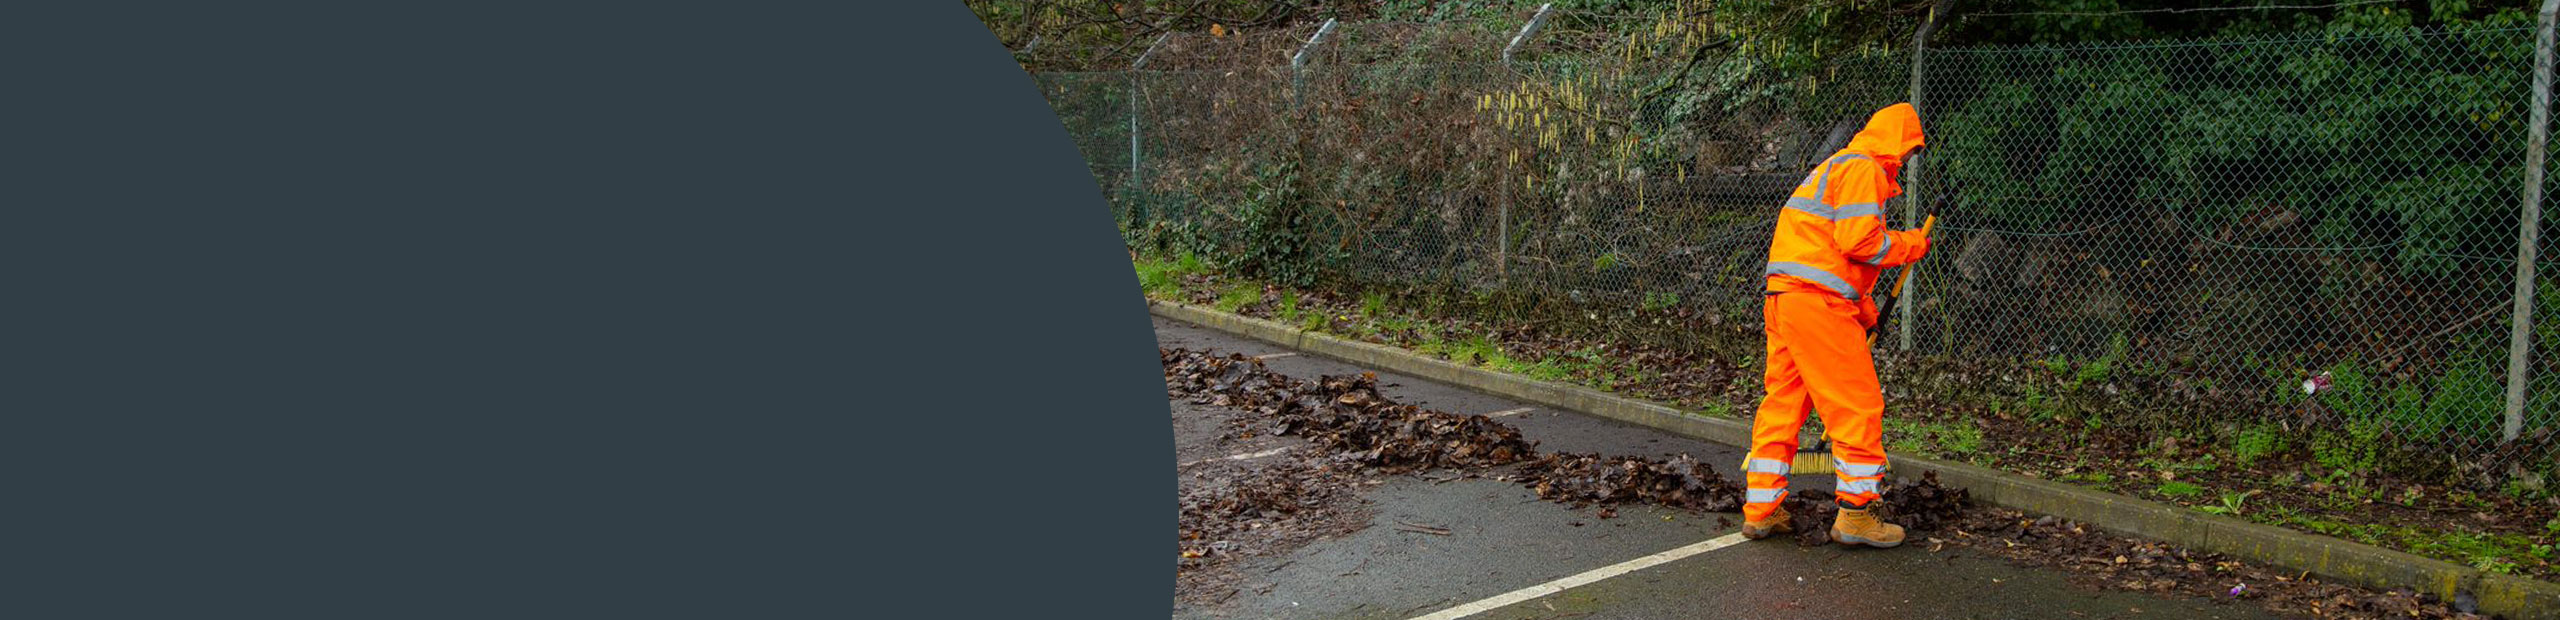 Car Park Cleaning Services - Merton